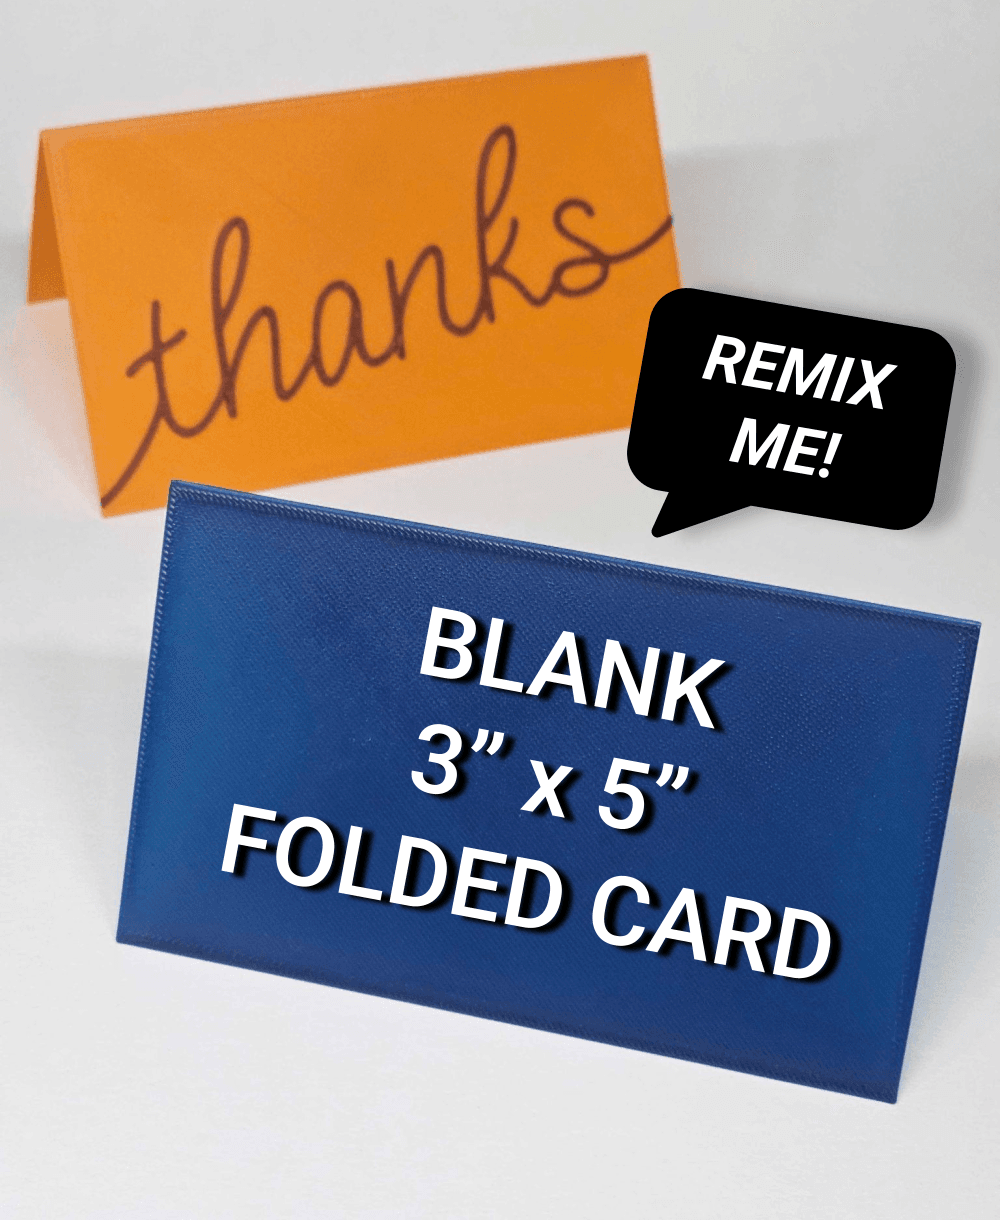 REMIX ME - Blank Folded Card 3"x5" | Greeting Card | Place Card | Tent Card / Signage 3d model